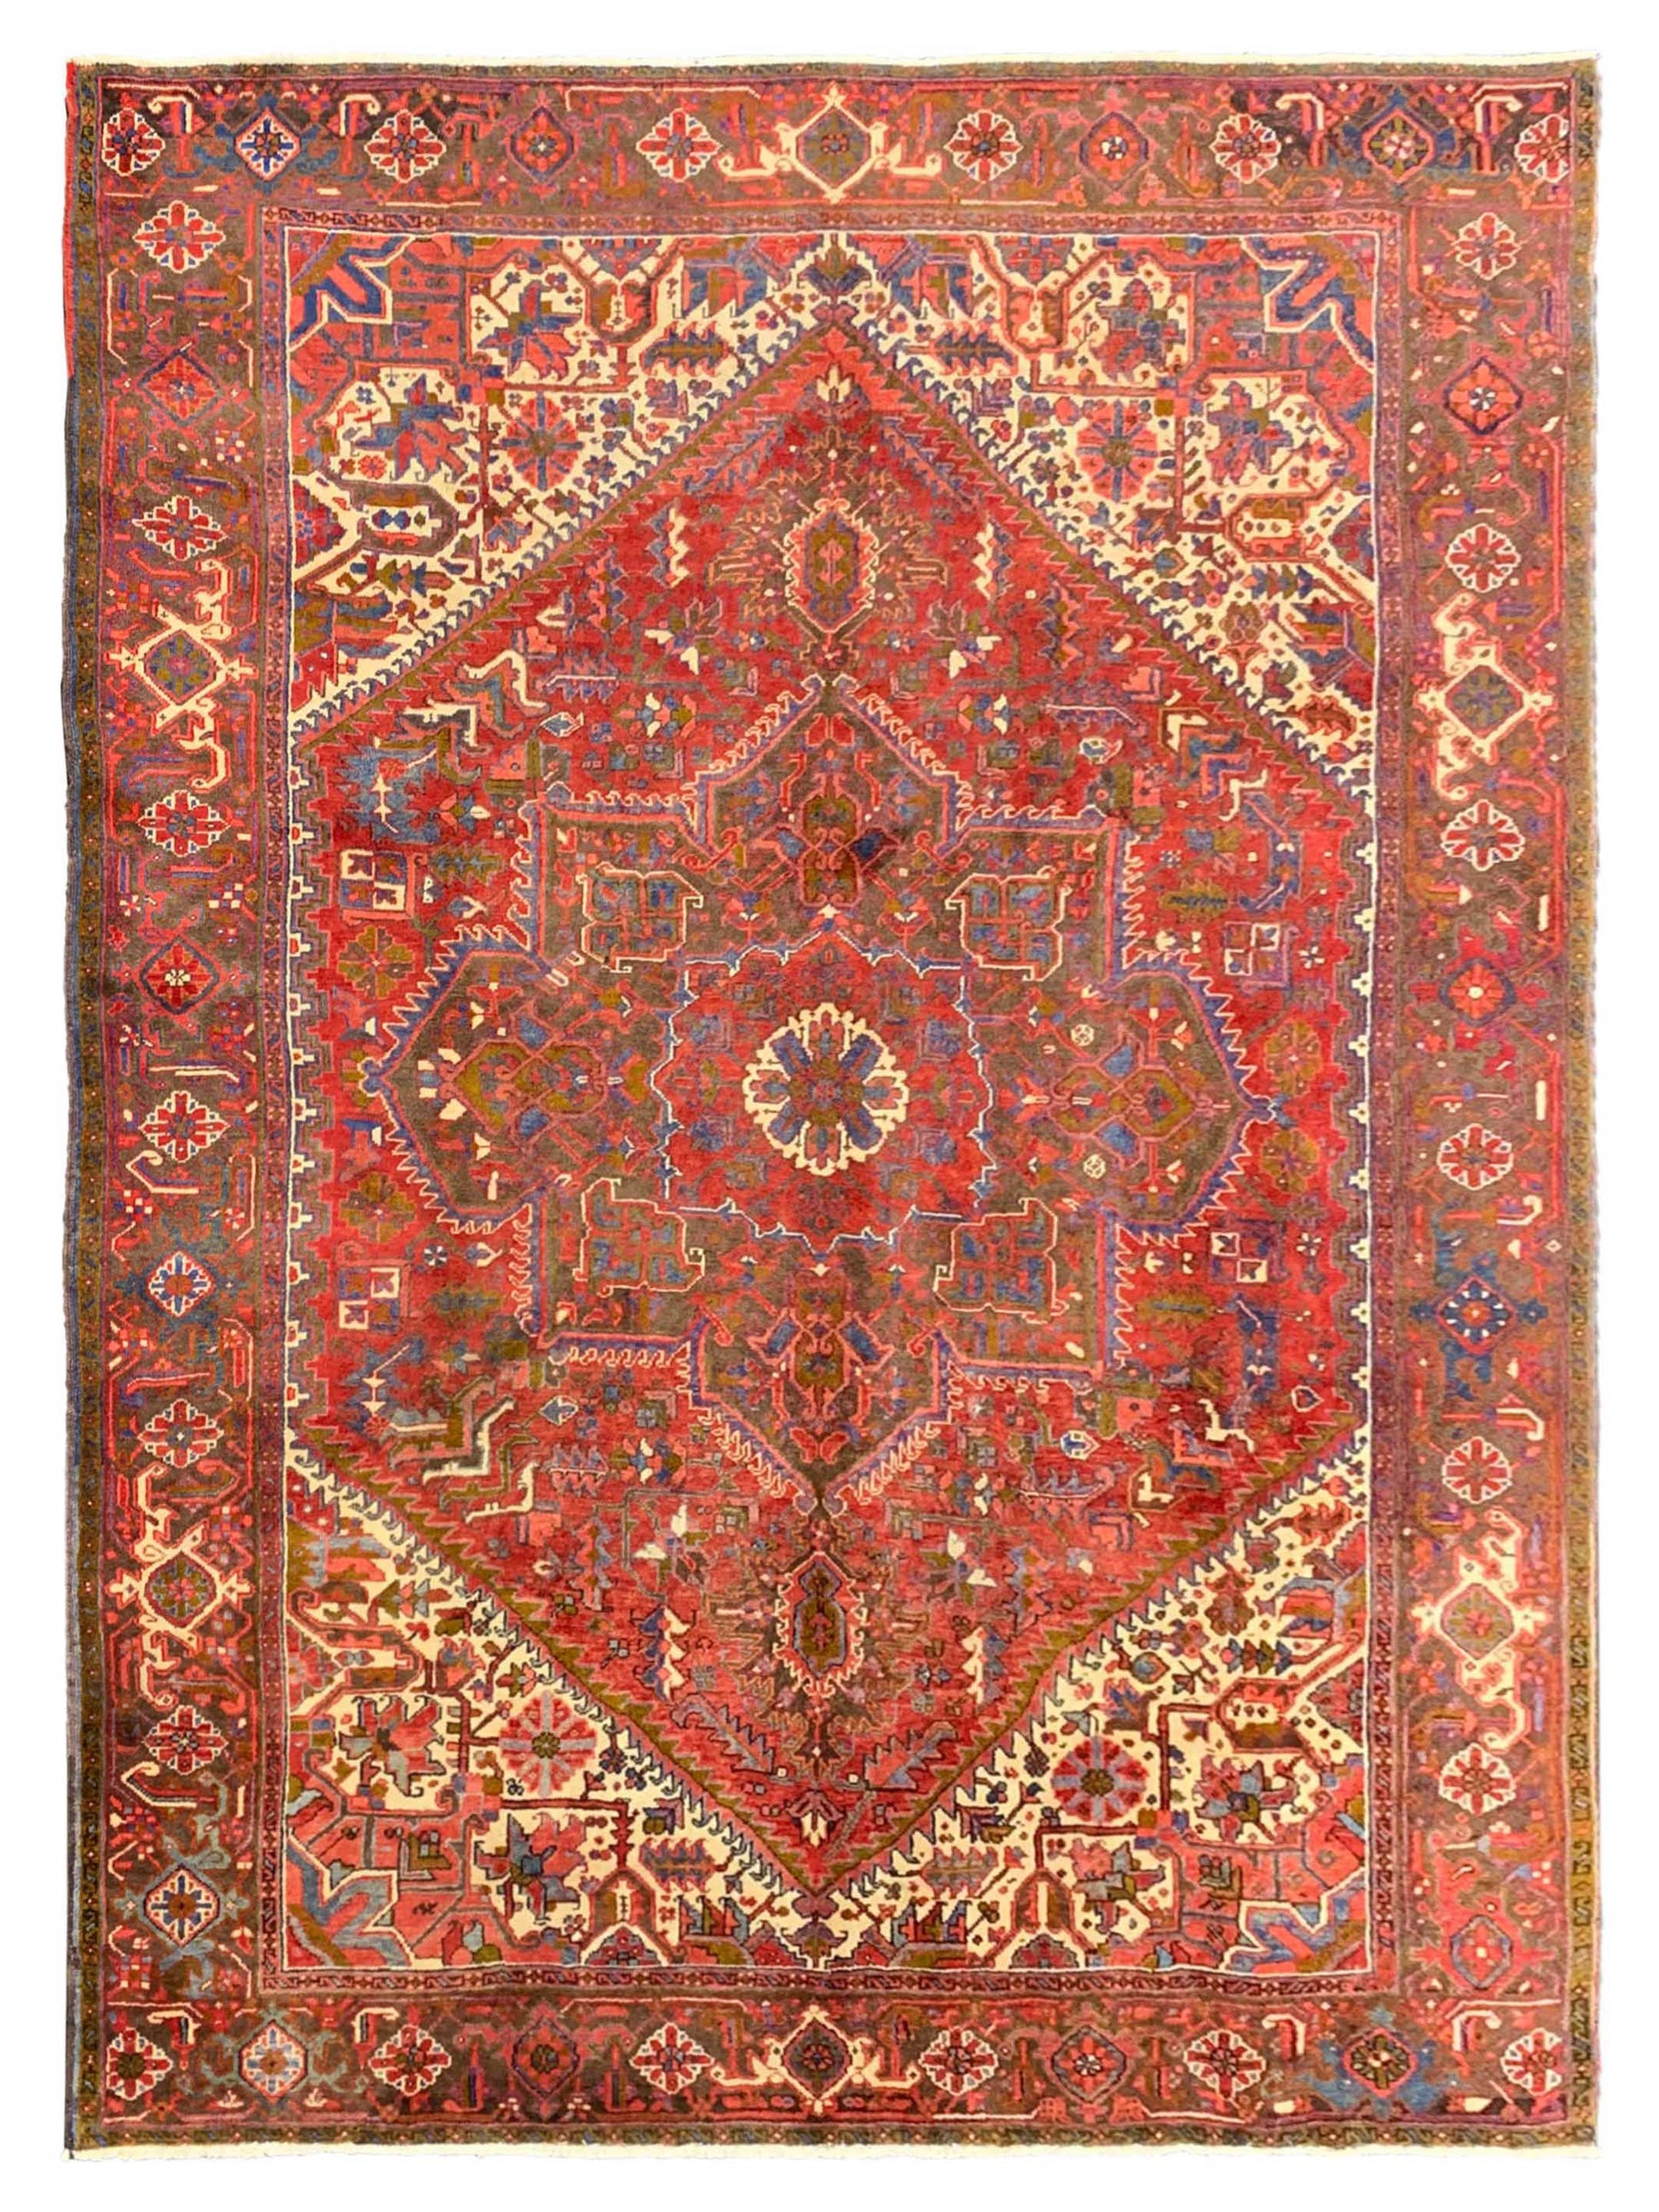 Artisan Persian Traditions 305737 Red Traditional Knotted Rug